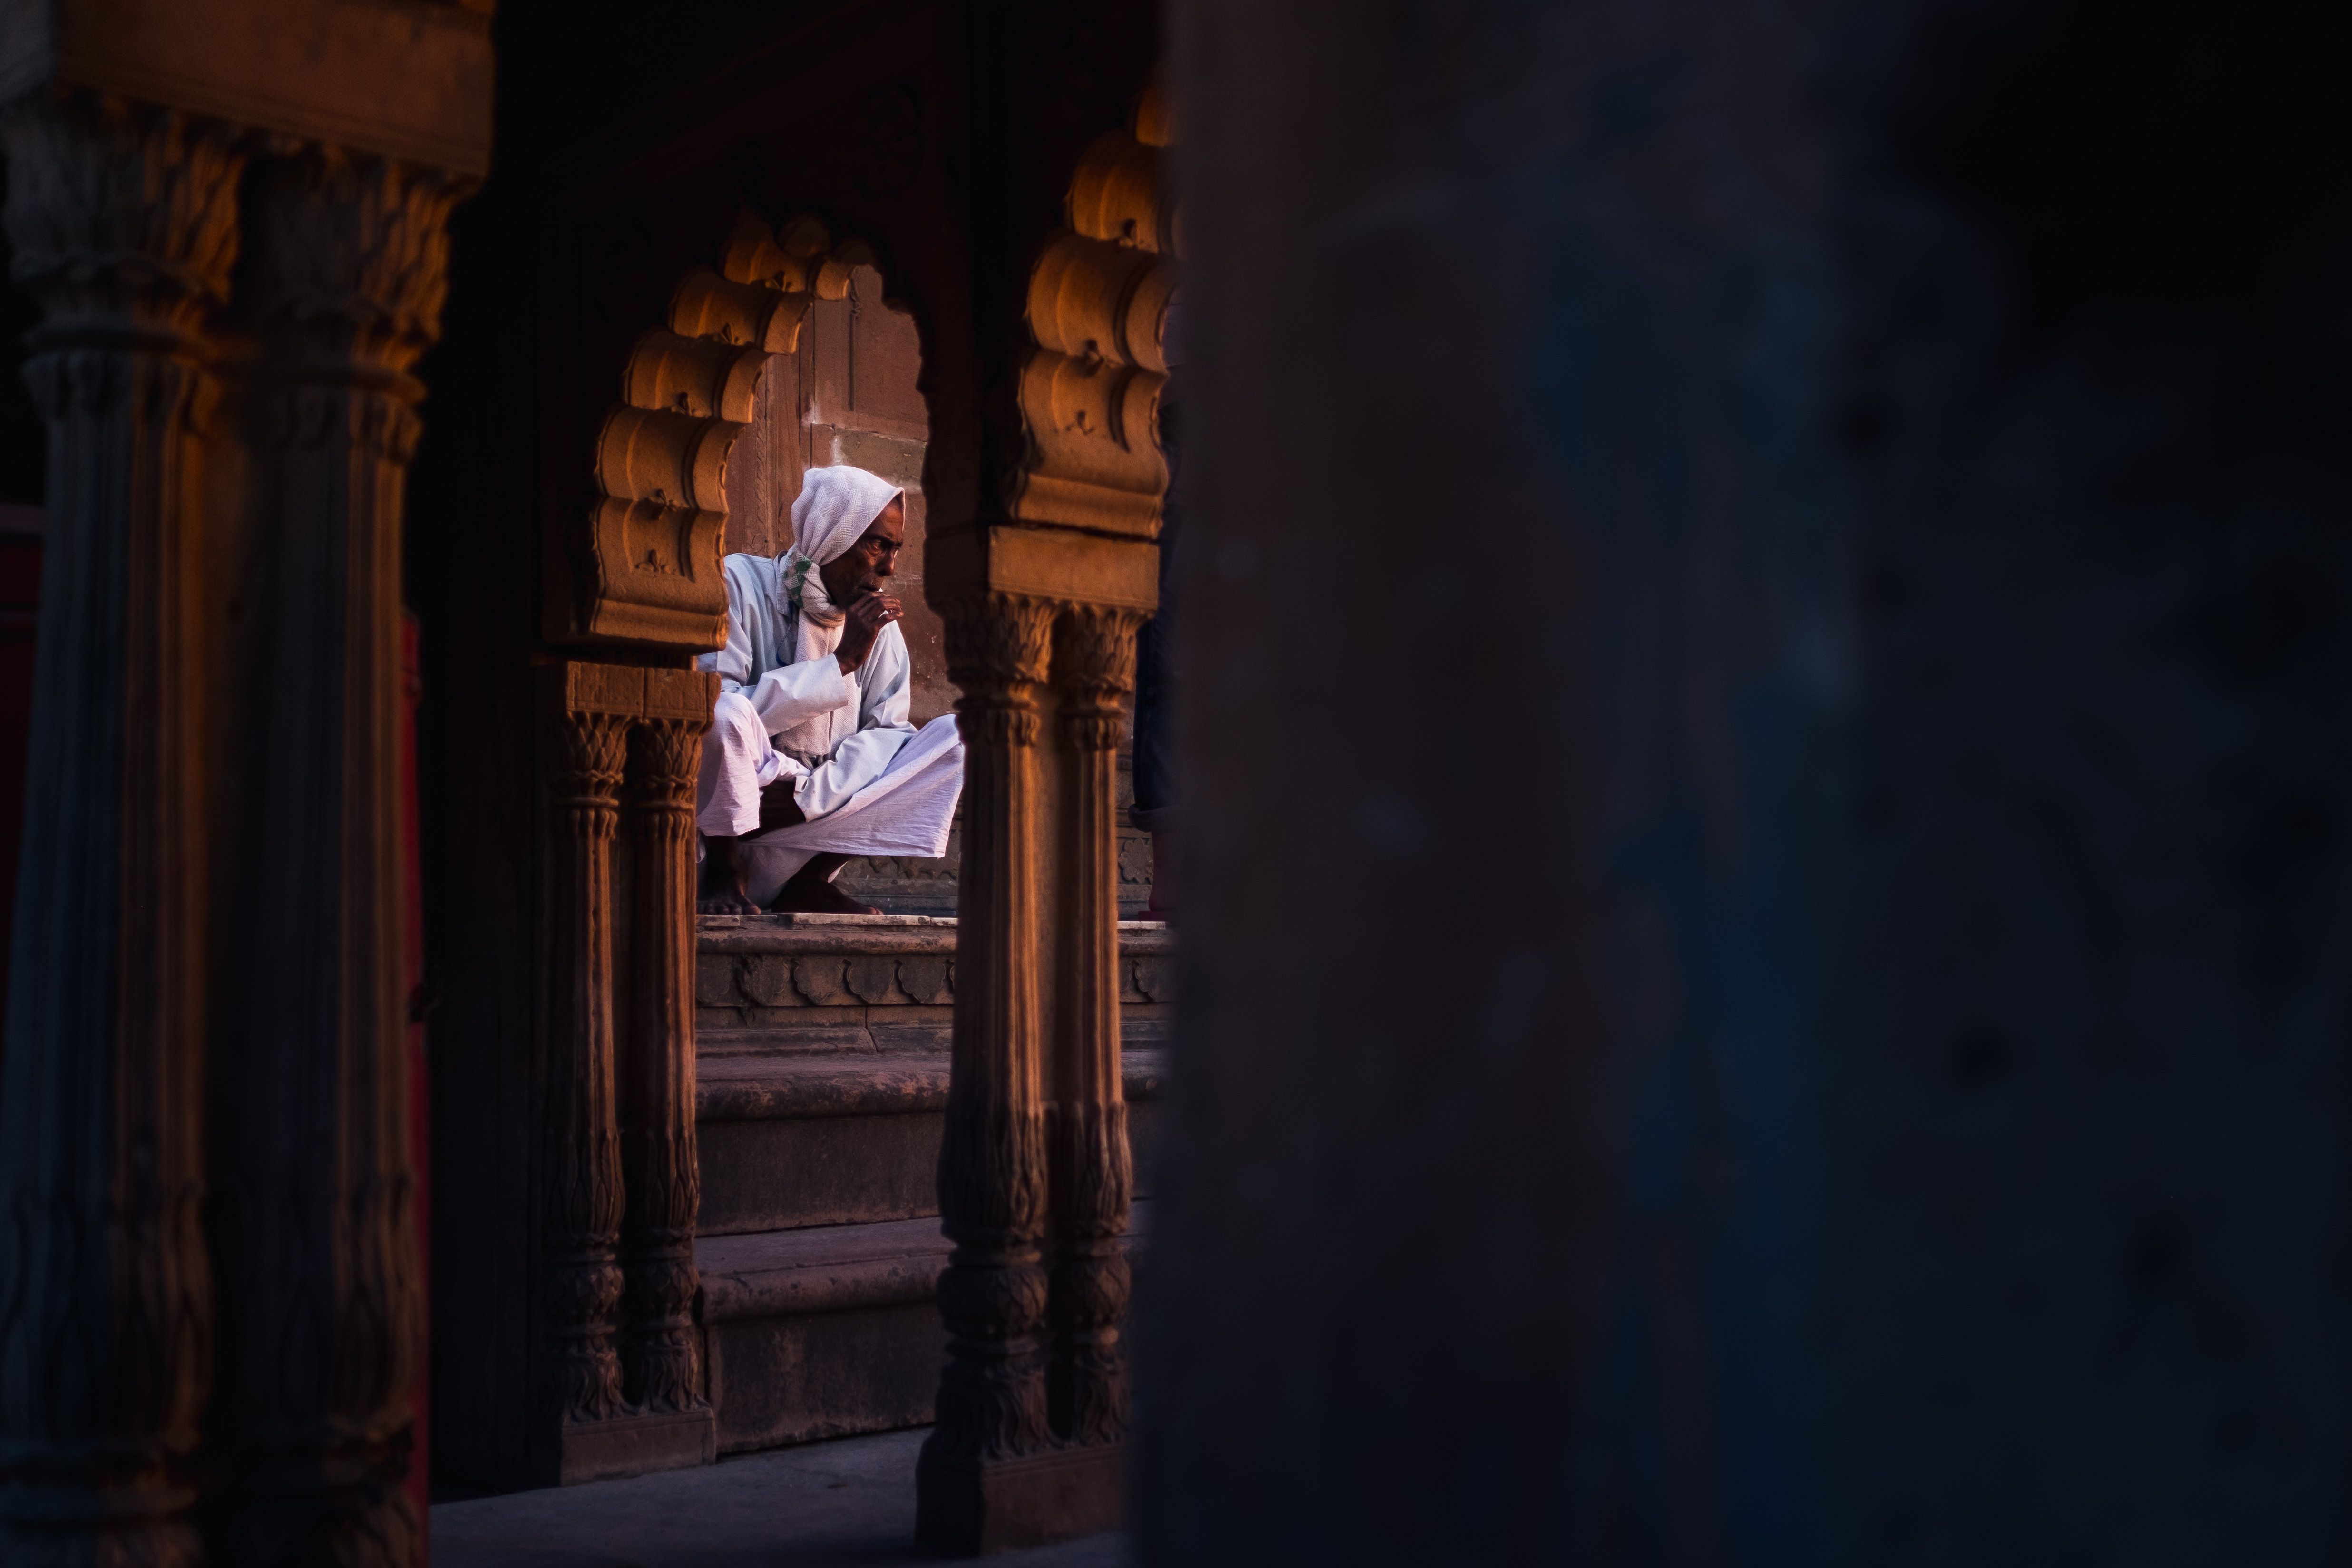 India Street Photography During Holi Festival. Priest sits on the stairs as people celebrate . Images by Jason Vinson